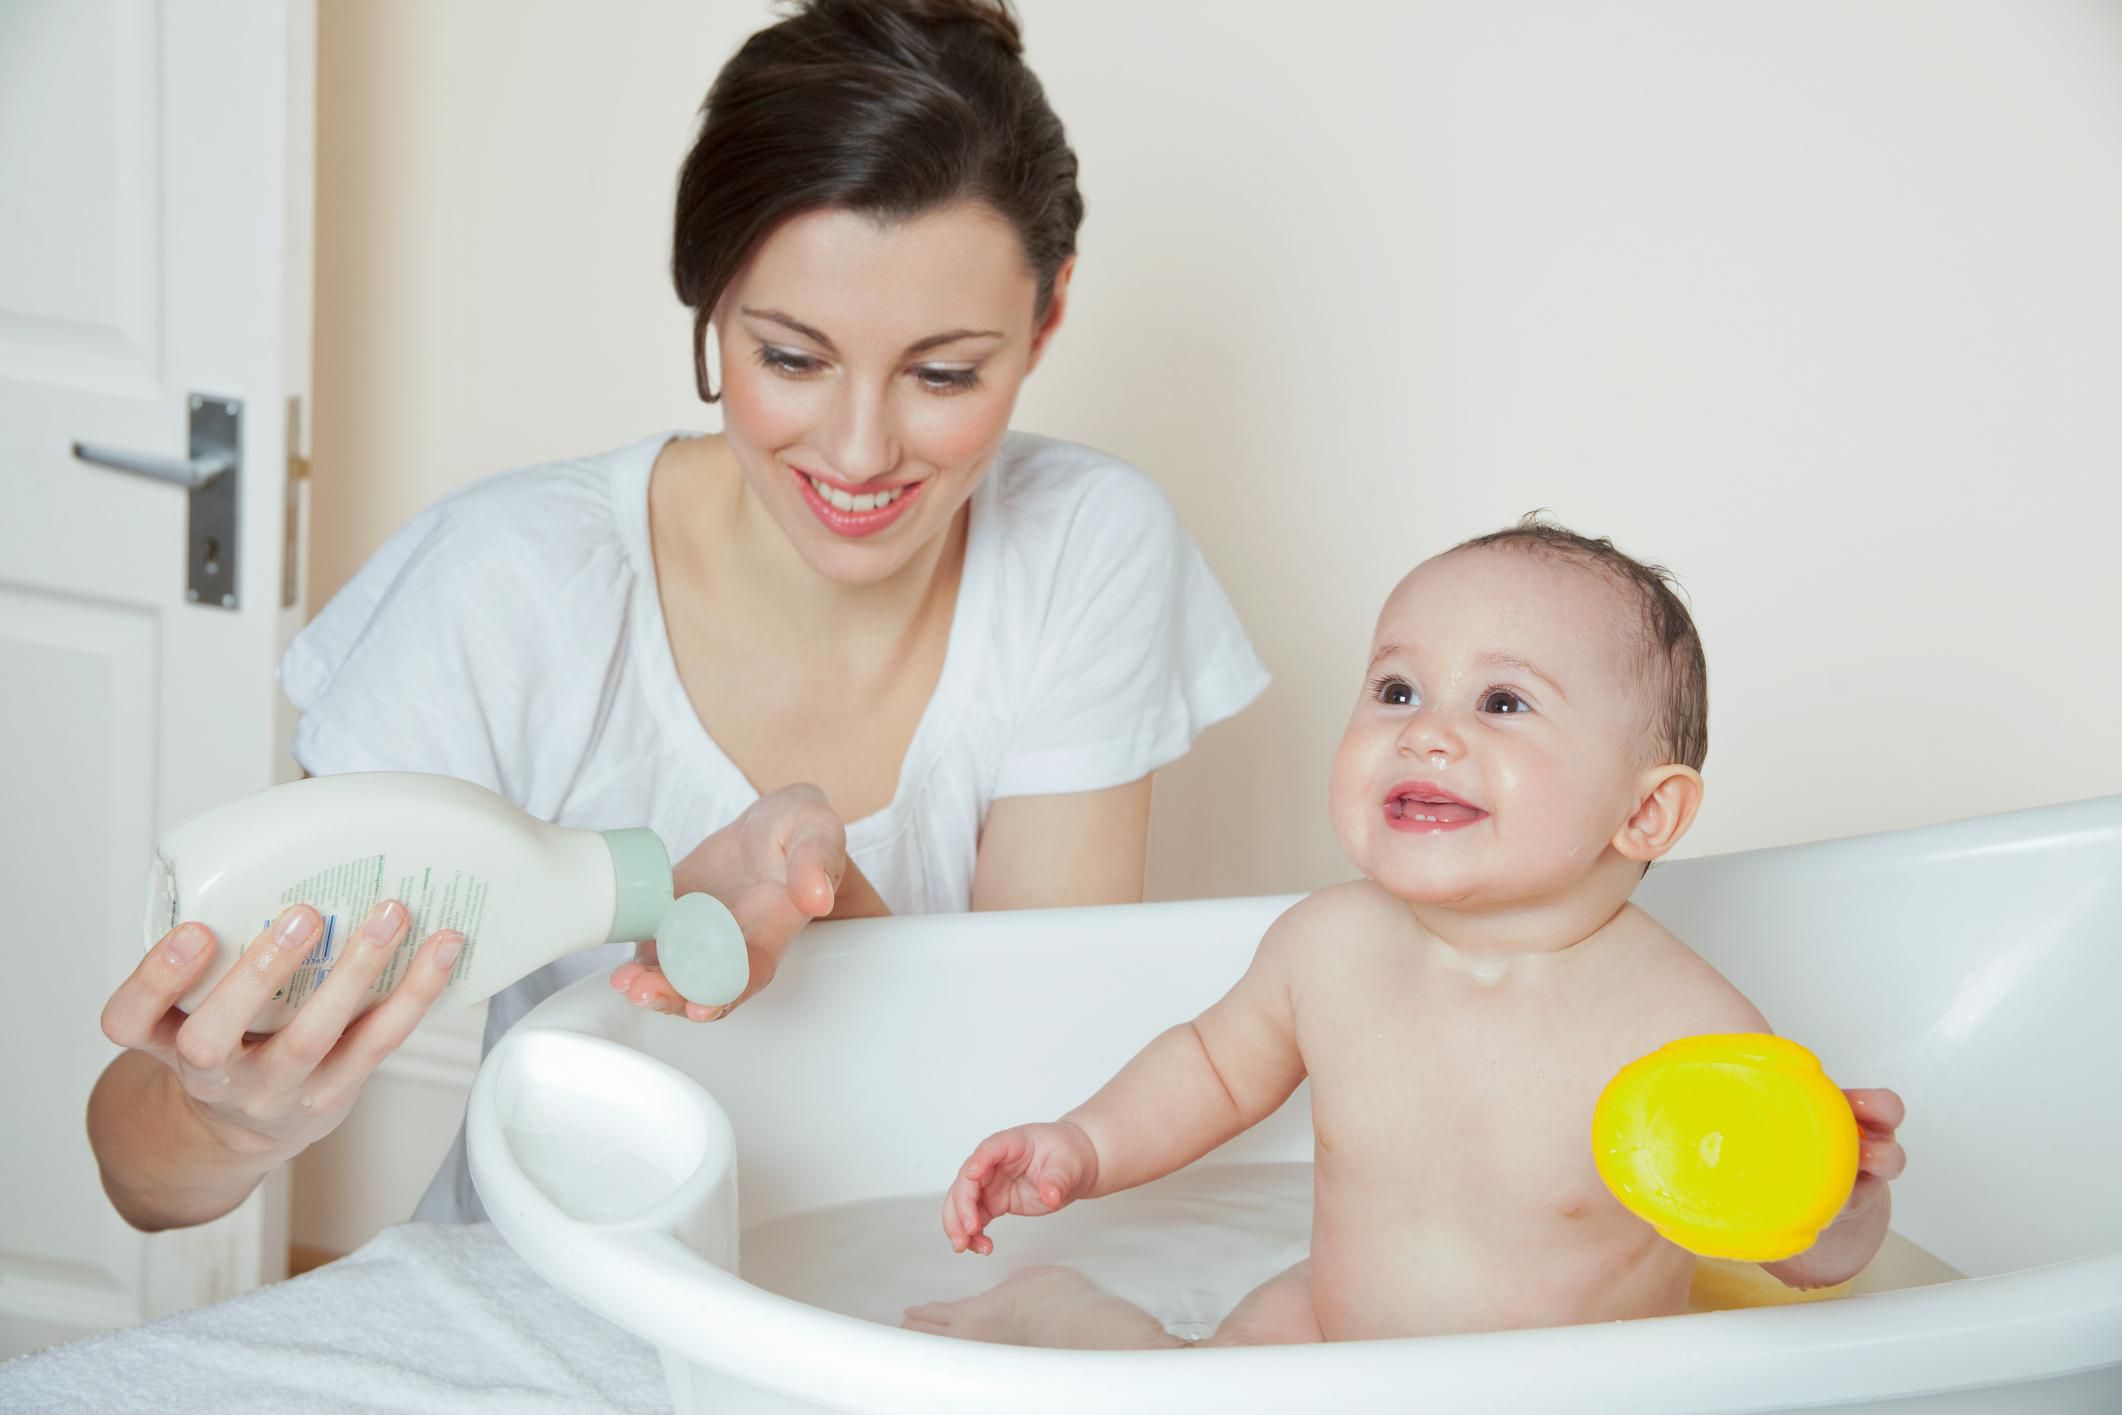 When Should I Stop Using a Baby Bath?